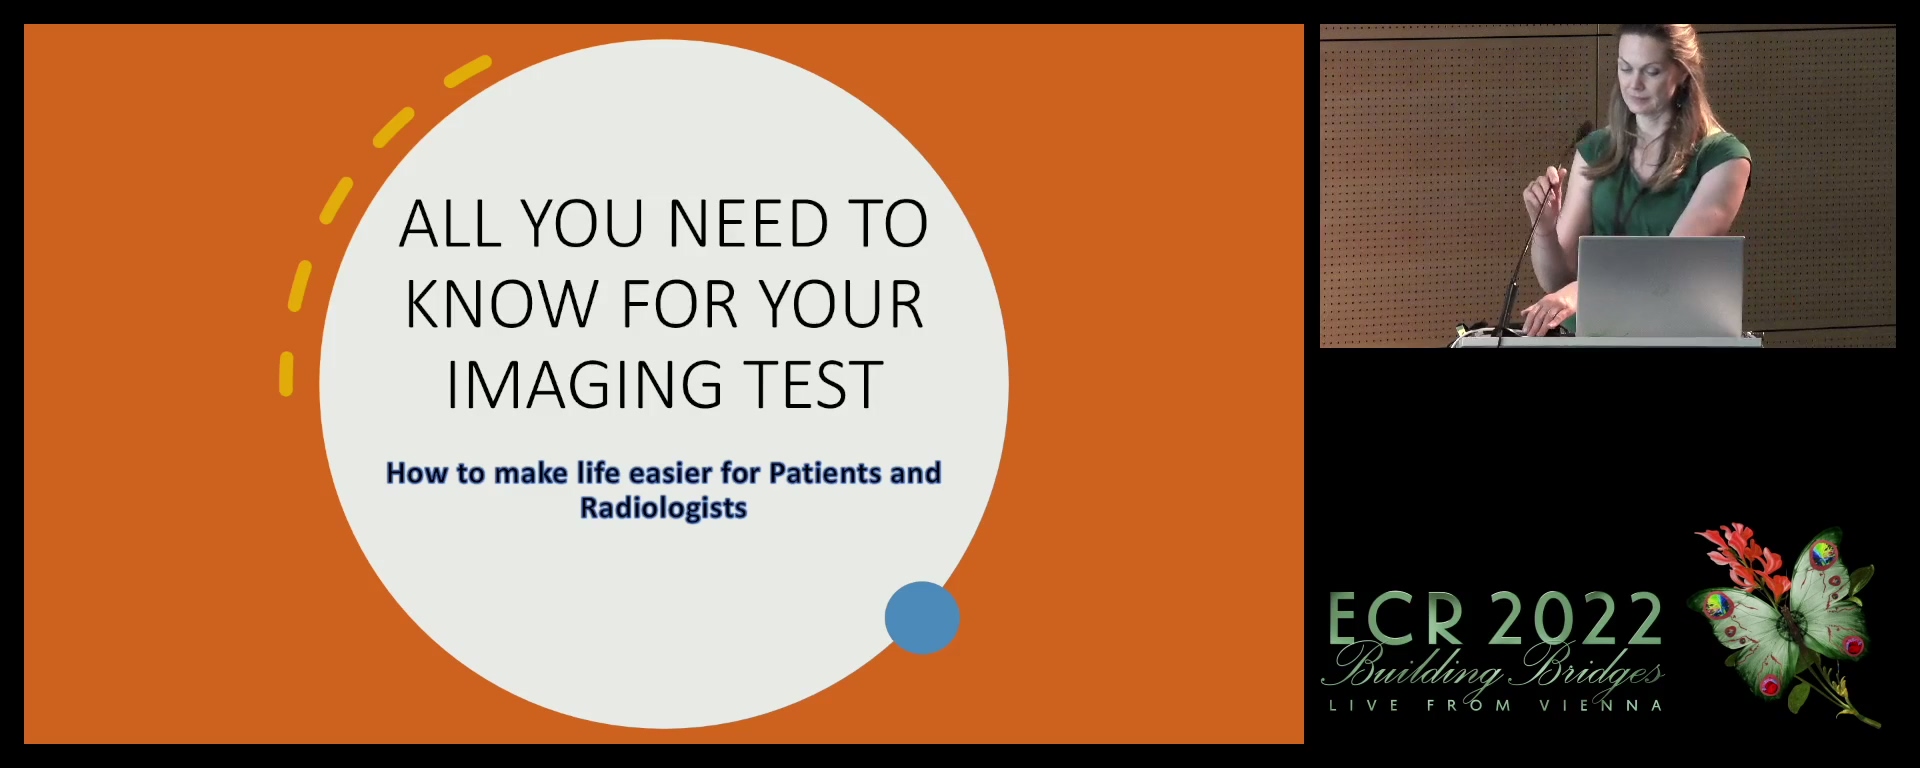 All you need to know about your imaging test: how to make life easier for radiologists and patients - Caroline Justich, Vienna / AT